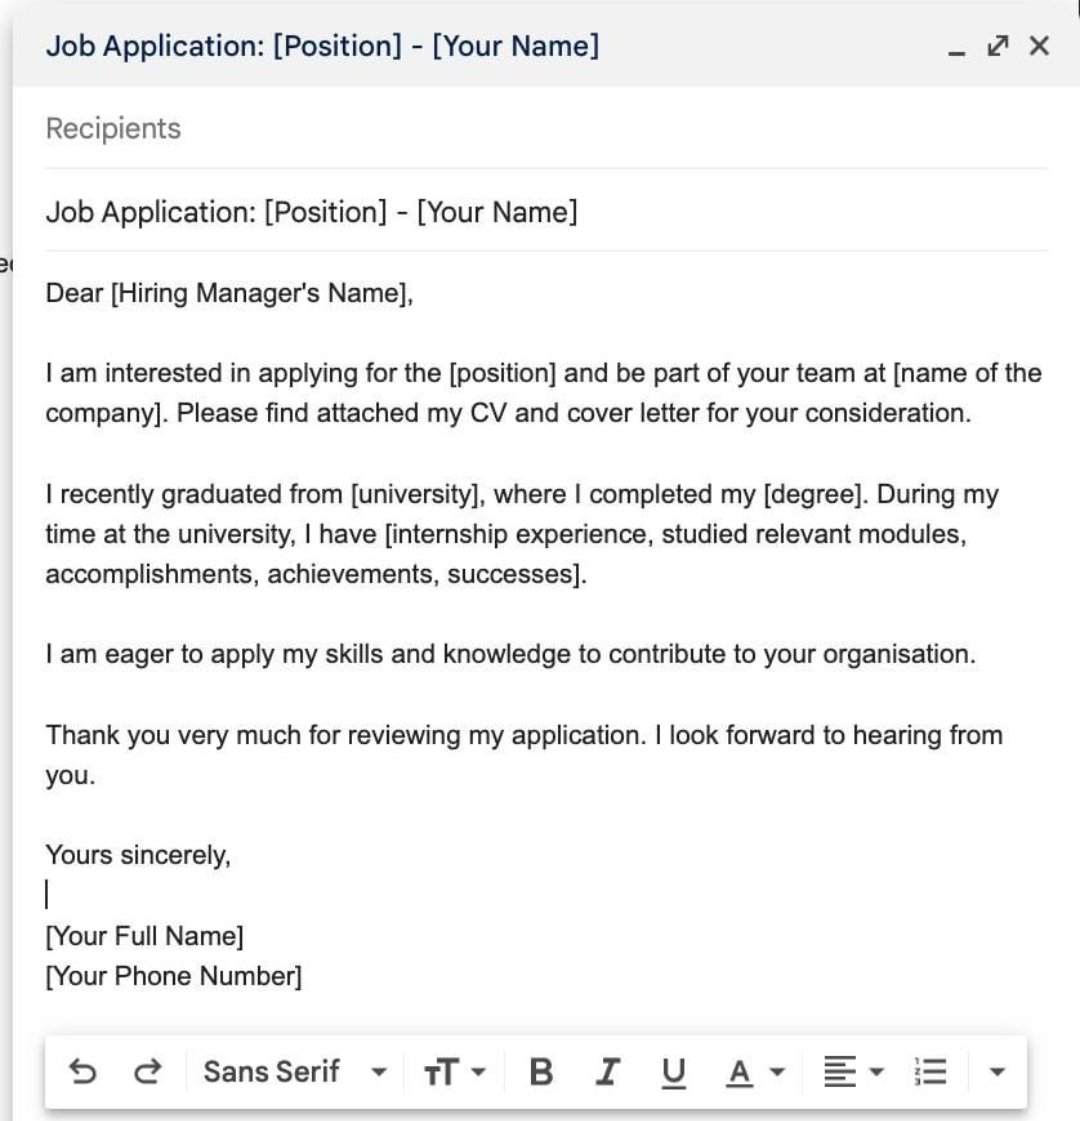 A simple cover letter example to send together with your job application.

These tips could be helpful to somebody out there so please share them.

#jobseekers #interviewtips #coverletter #coverlettertips